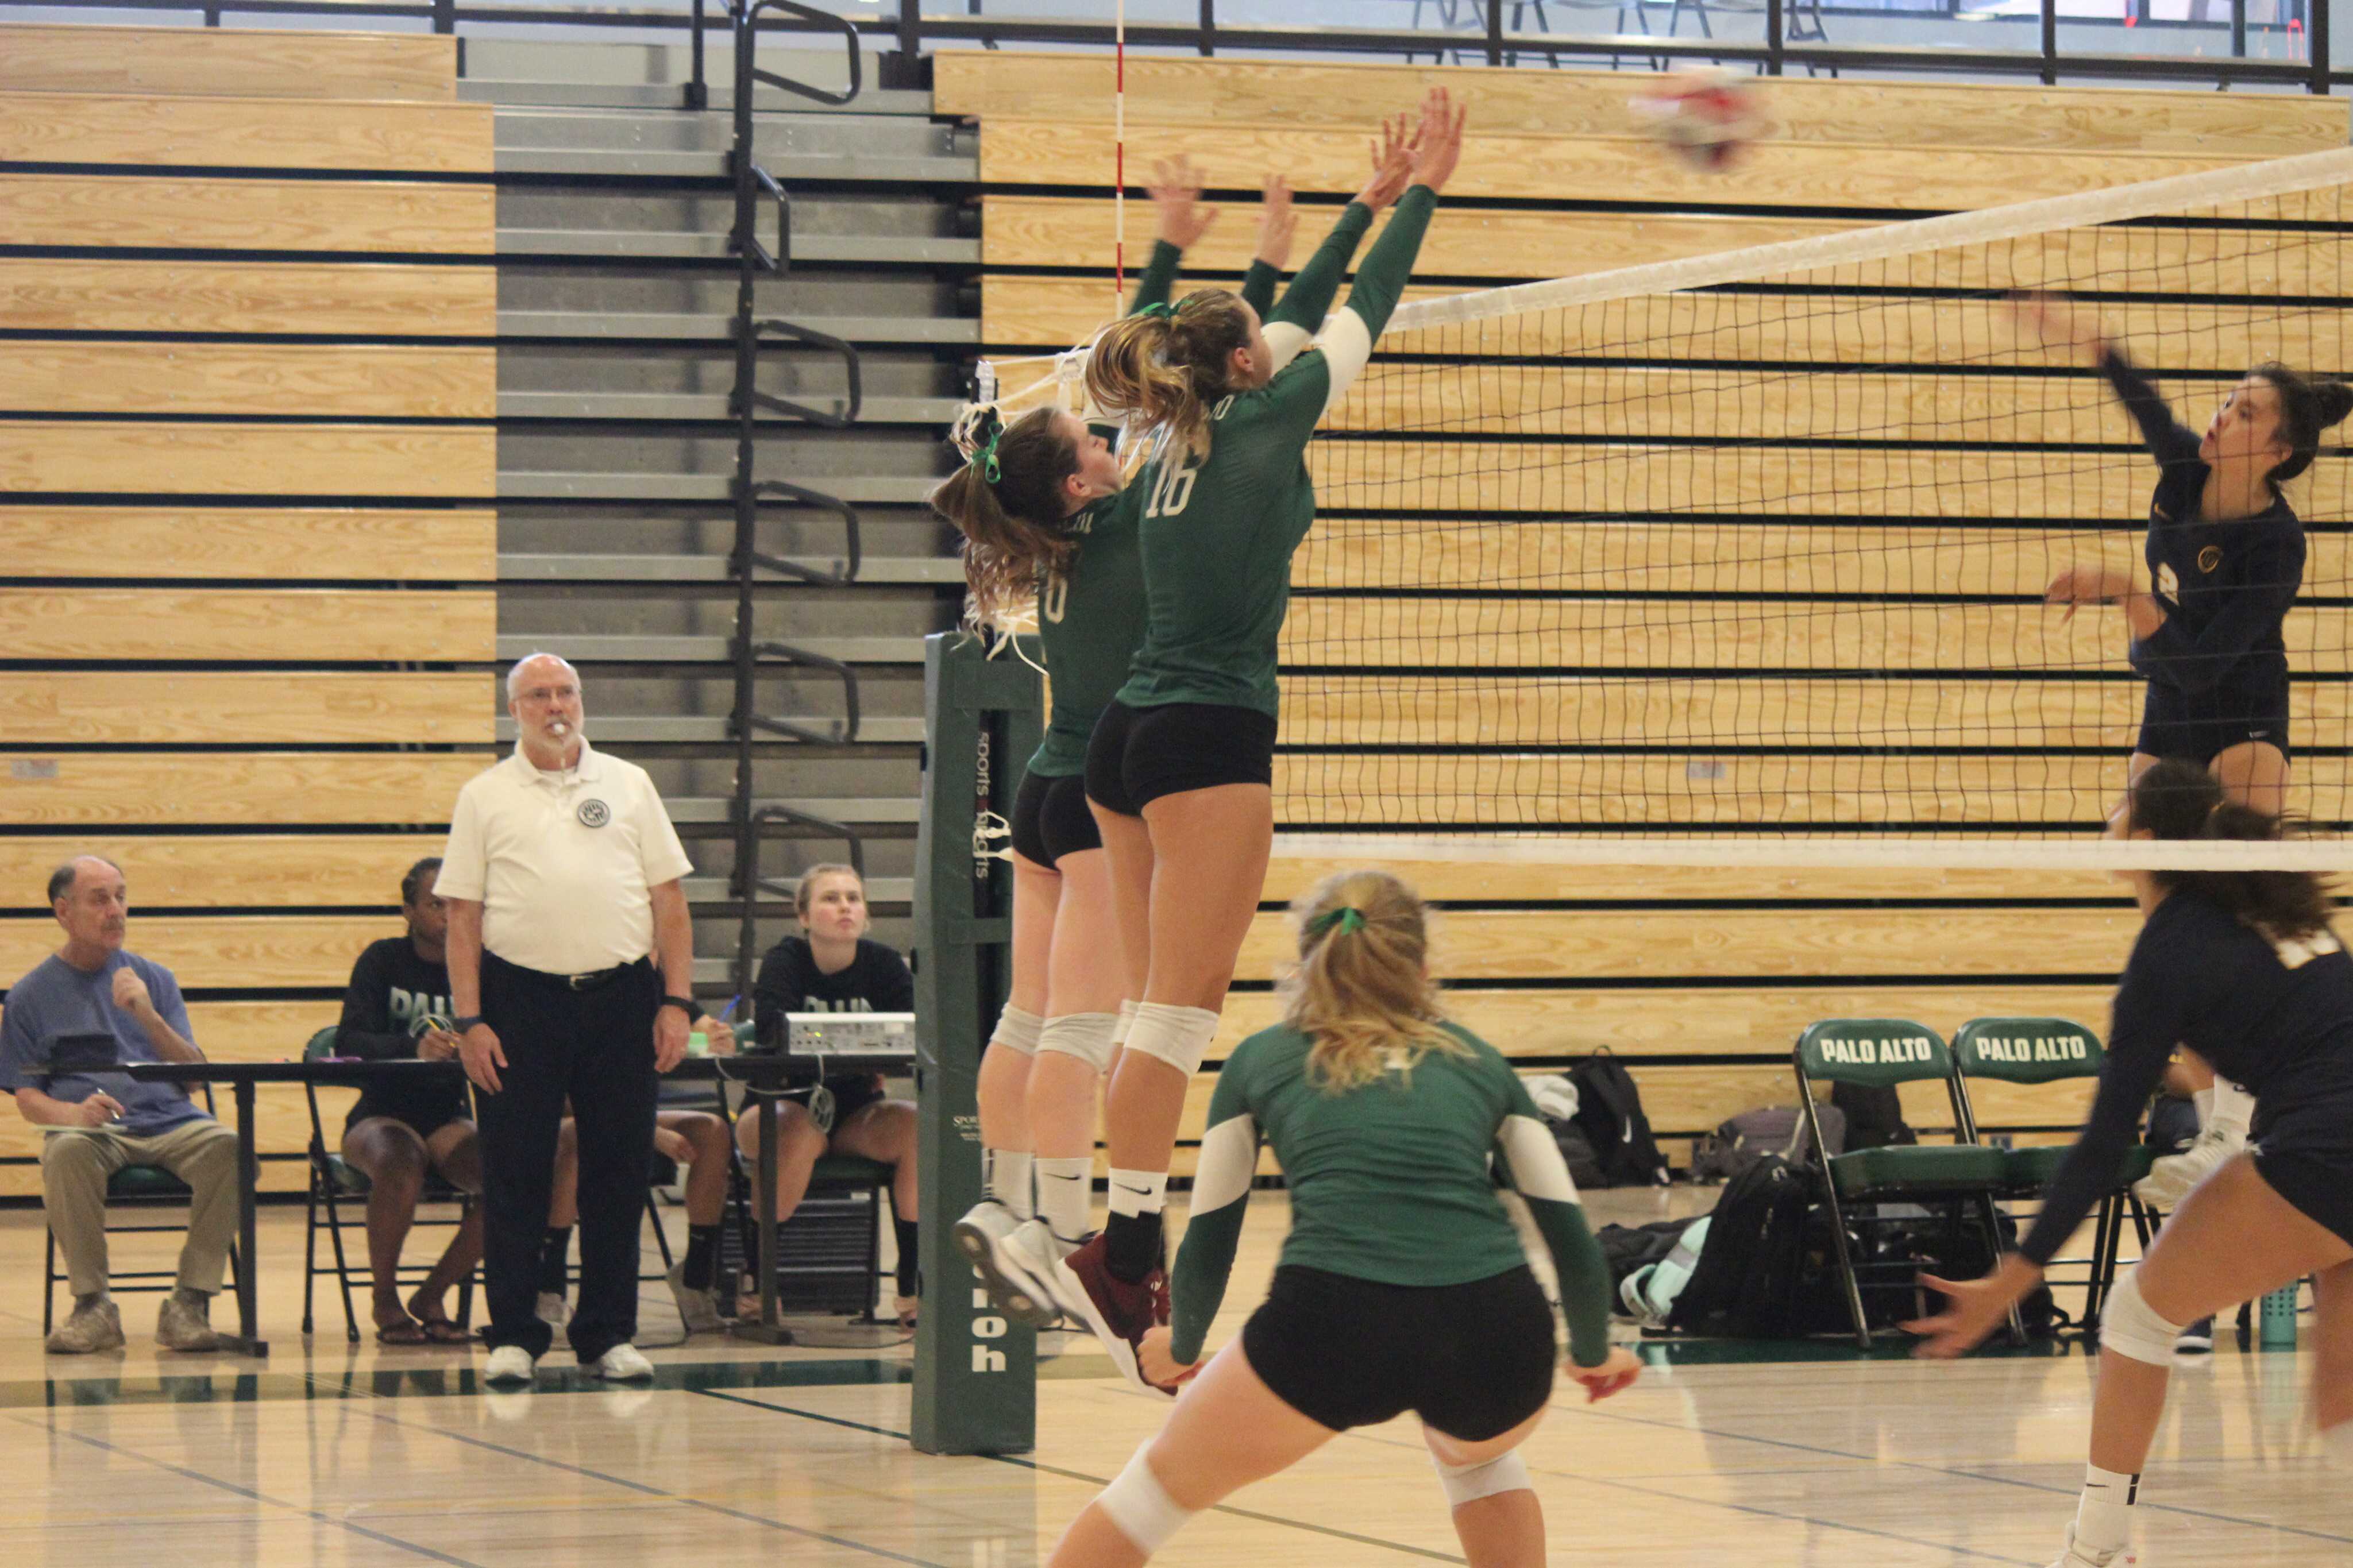 Sophomore Amelia Gibbs (right) and junior Mallory Kuppe (left) block a strike against Menlo School. The Vikings would end up winning the match in three straight sets. Photo by Ellie Krugler